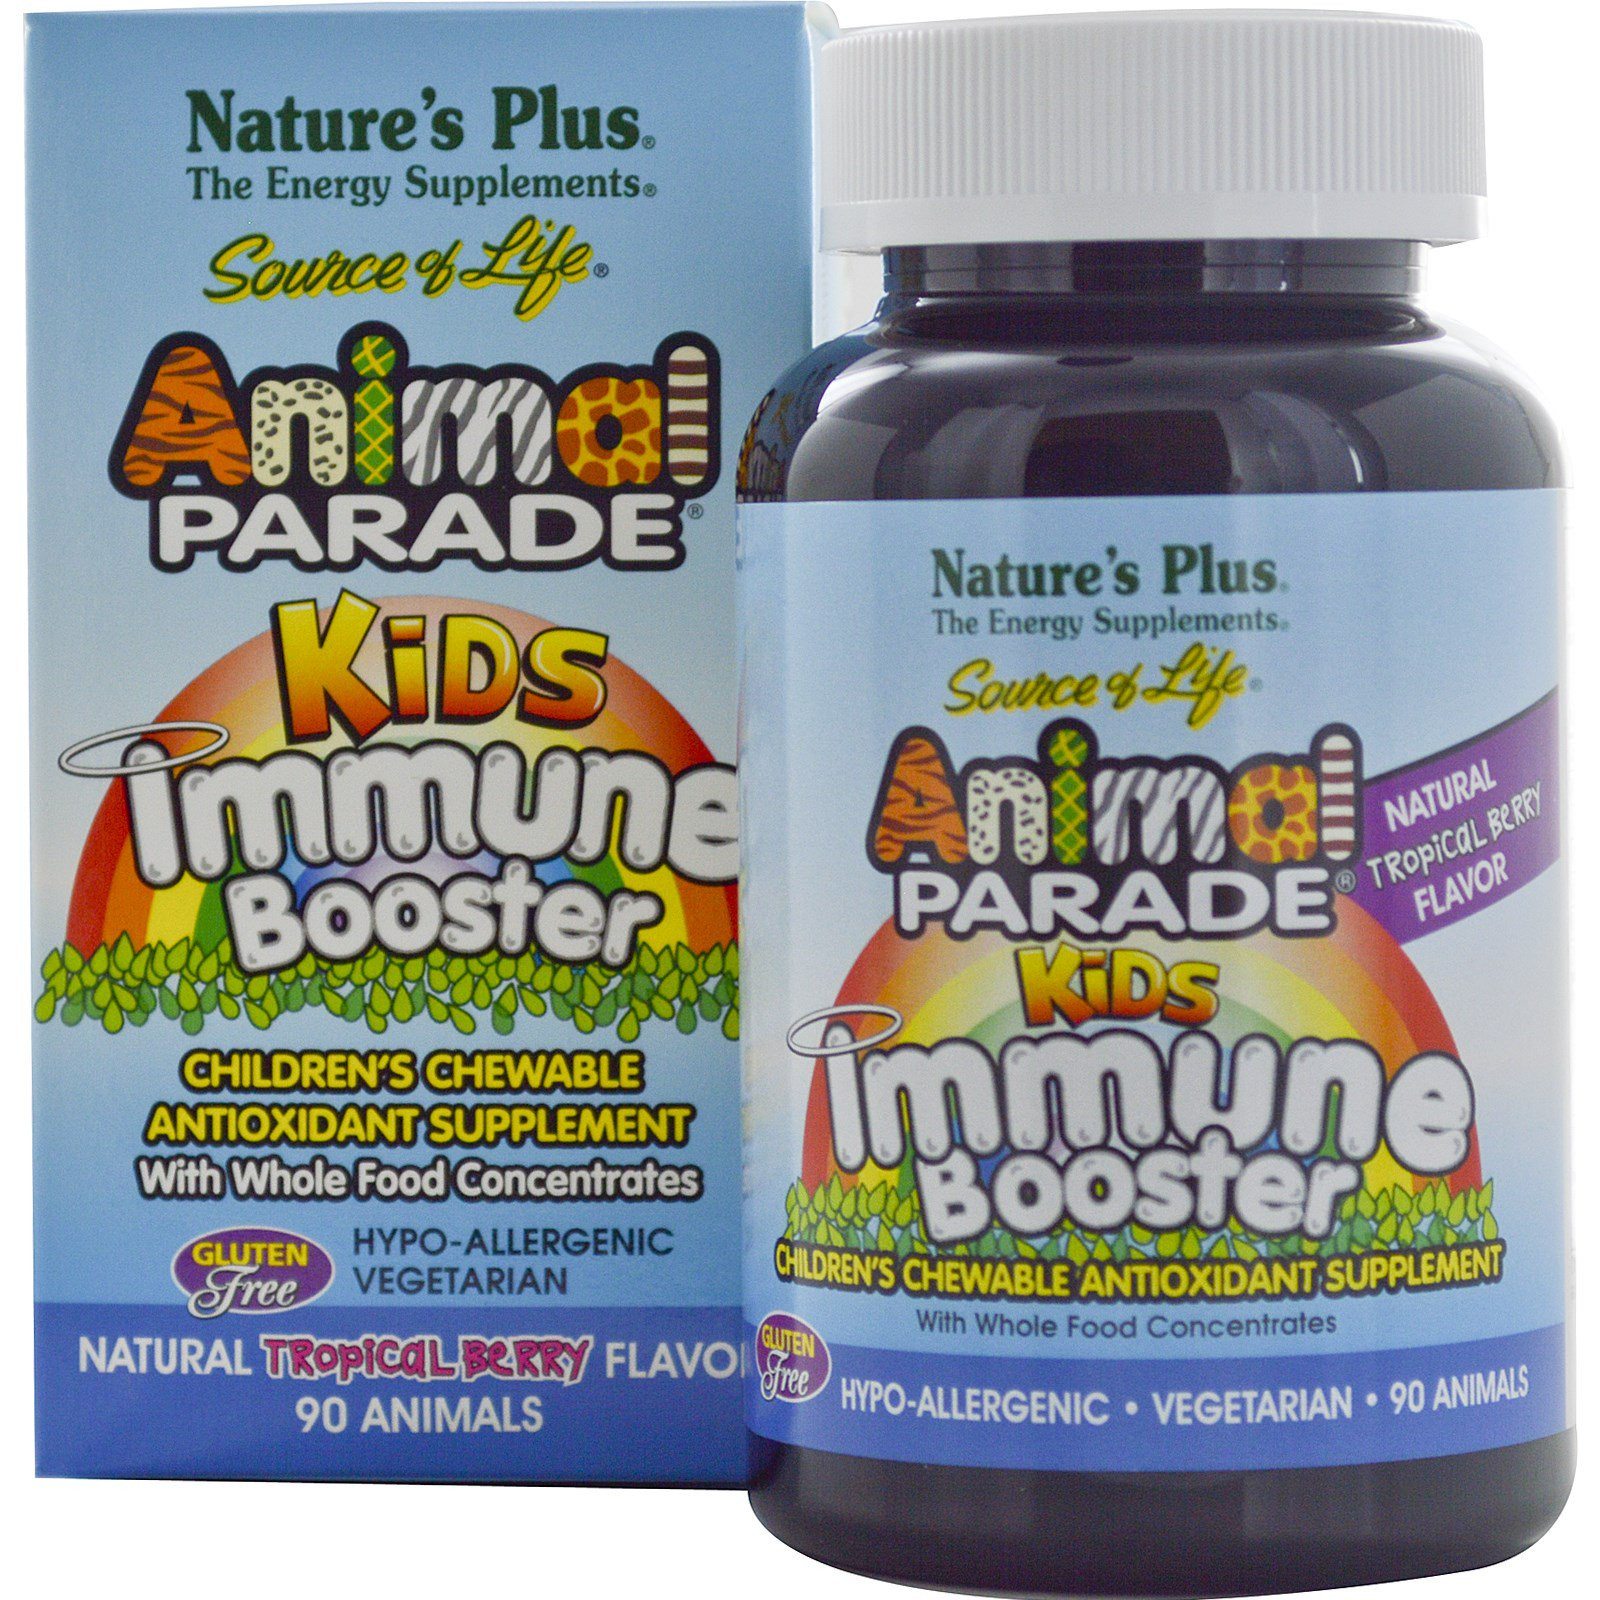 Kids Immune Booster, Natural Tropical Berry Flavor (90 Animals) - Nature&apos;s Plus